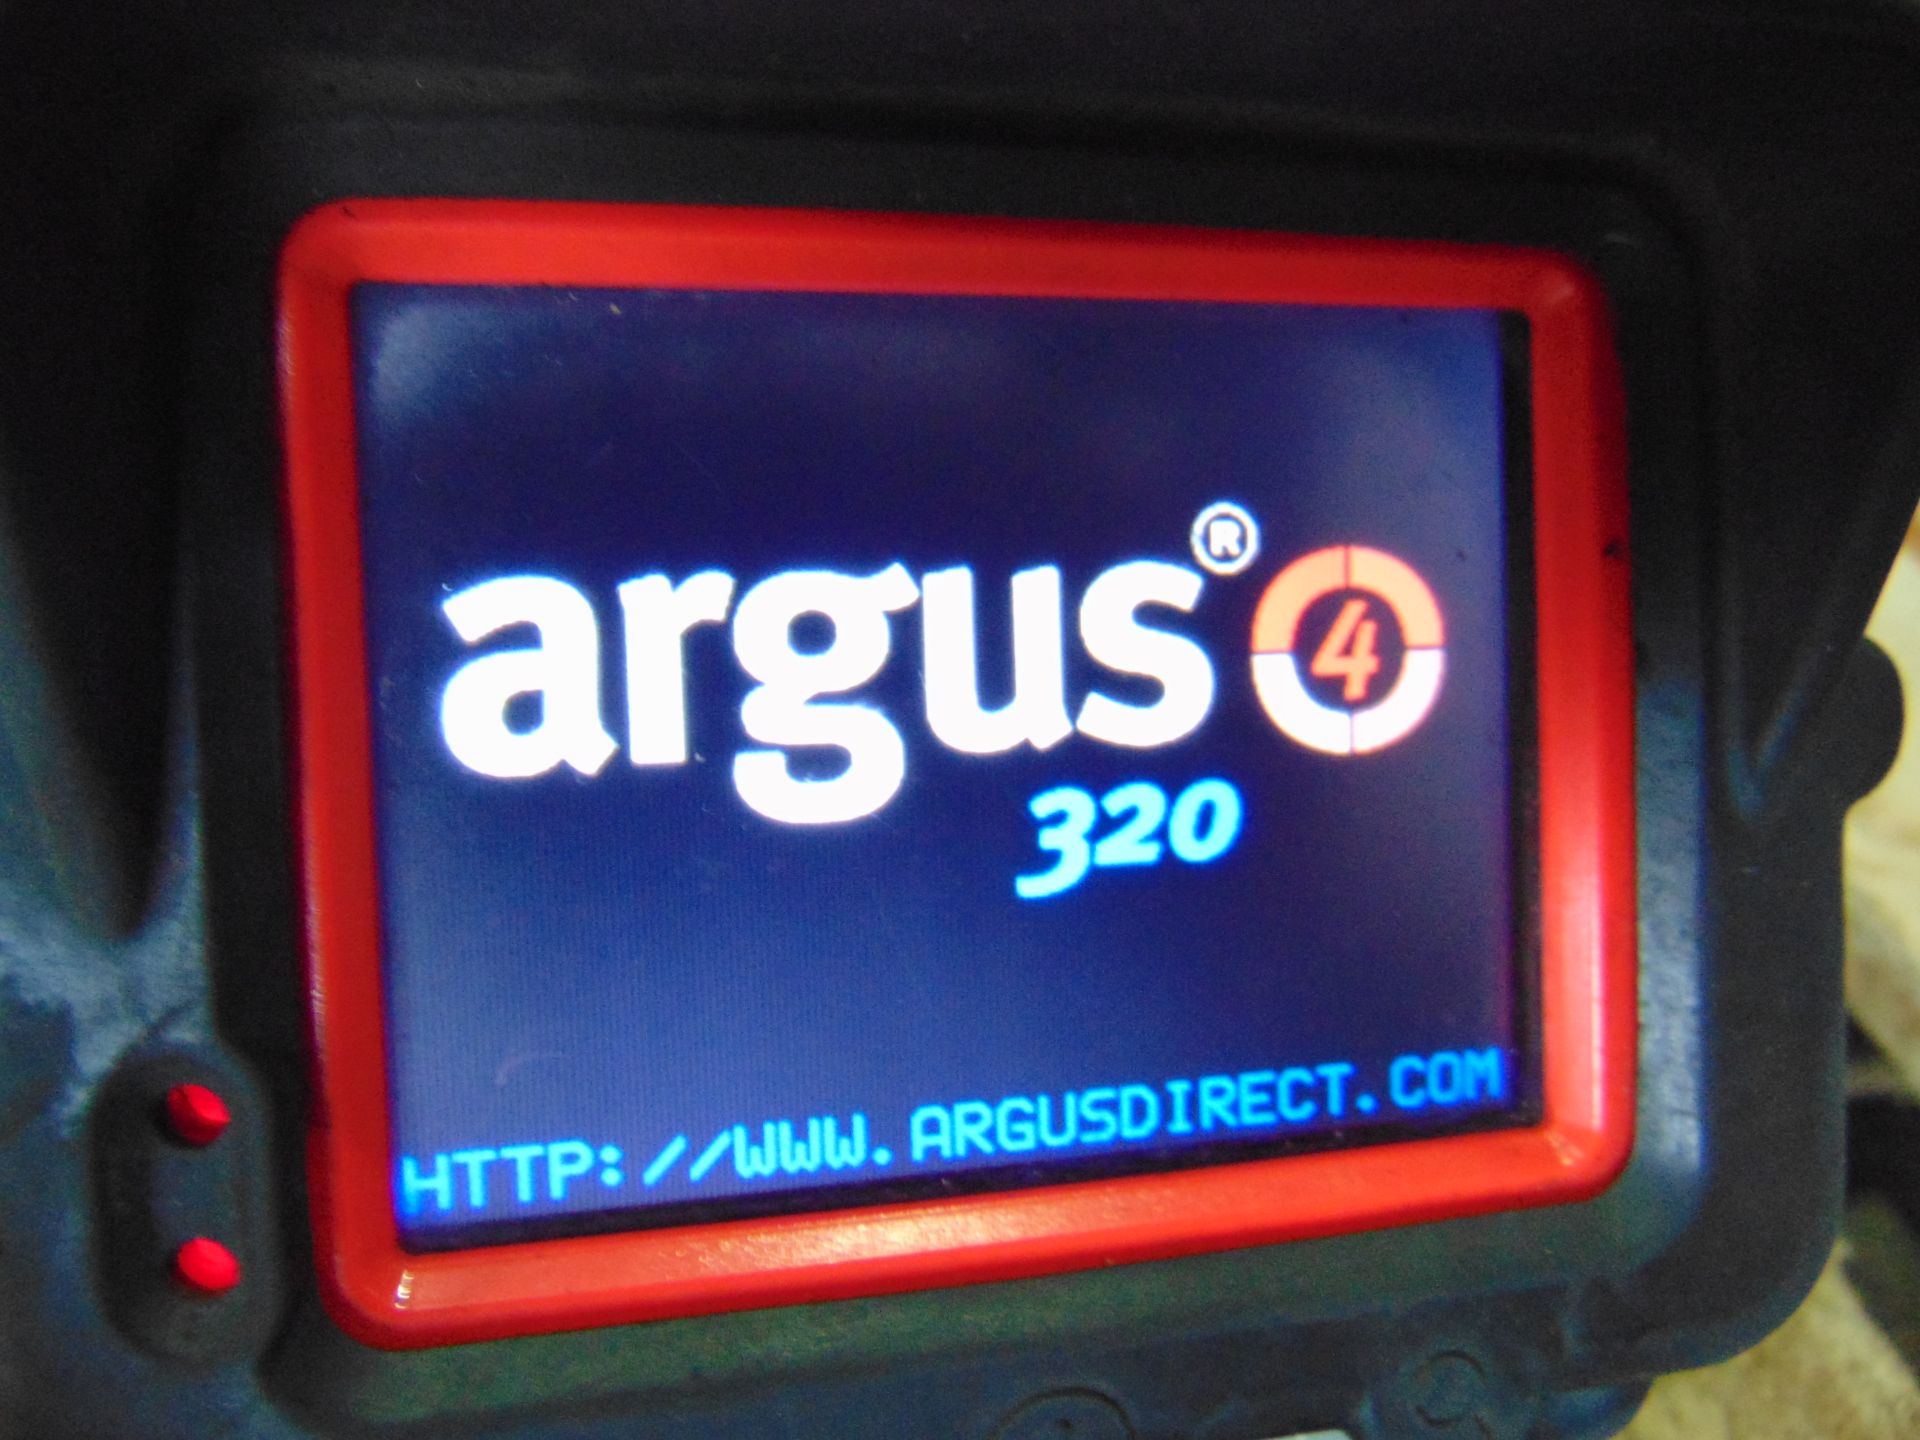 Argus 4-320 Fire Fighting Thermal Imaging Camera c/w Battery, Charger & Carry Bag - Image 4 of 9